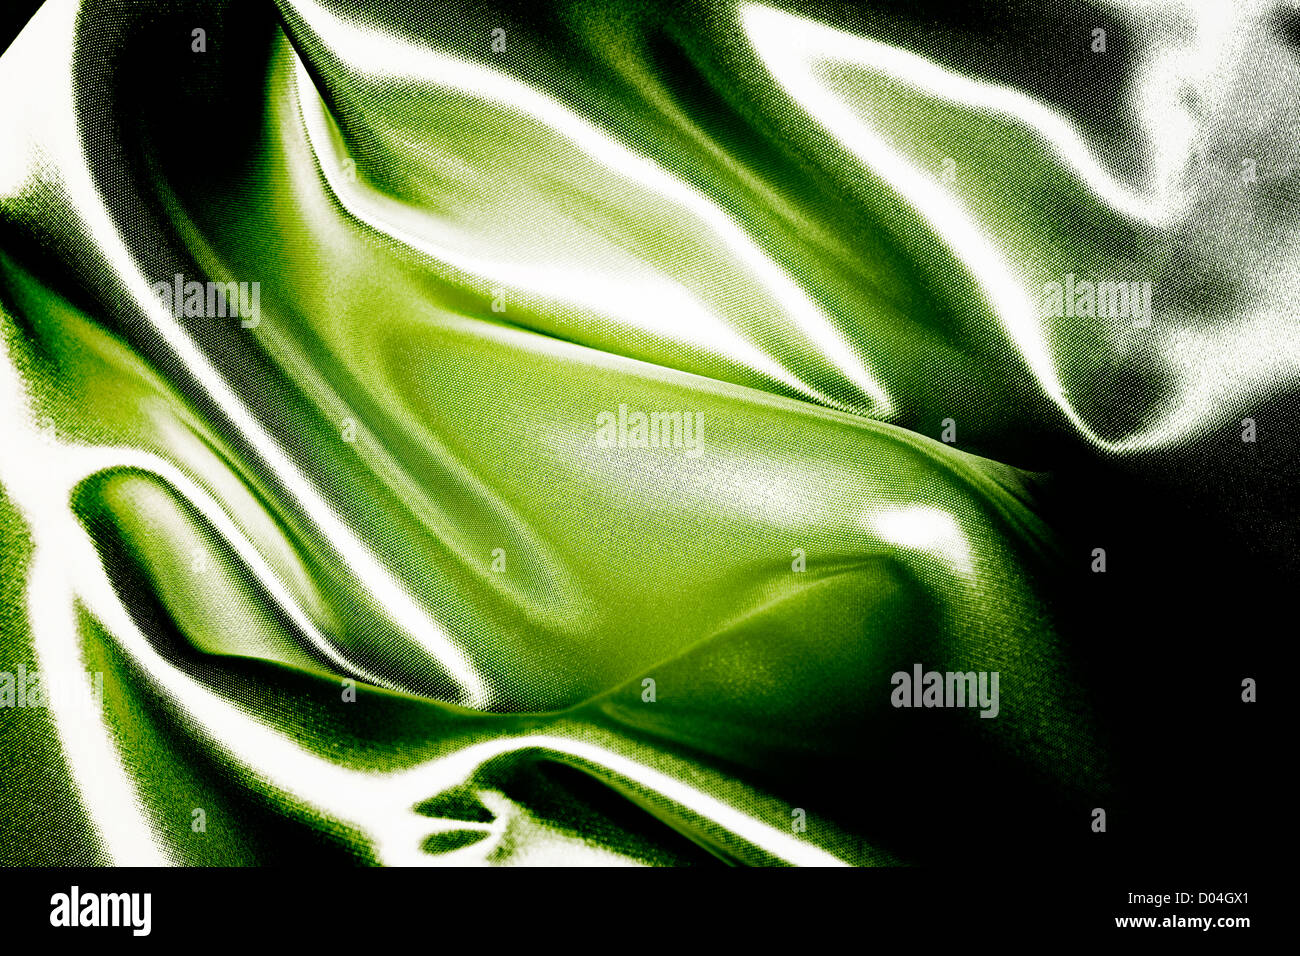 Background of a Green blanket Stock Photo